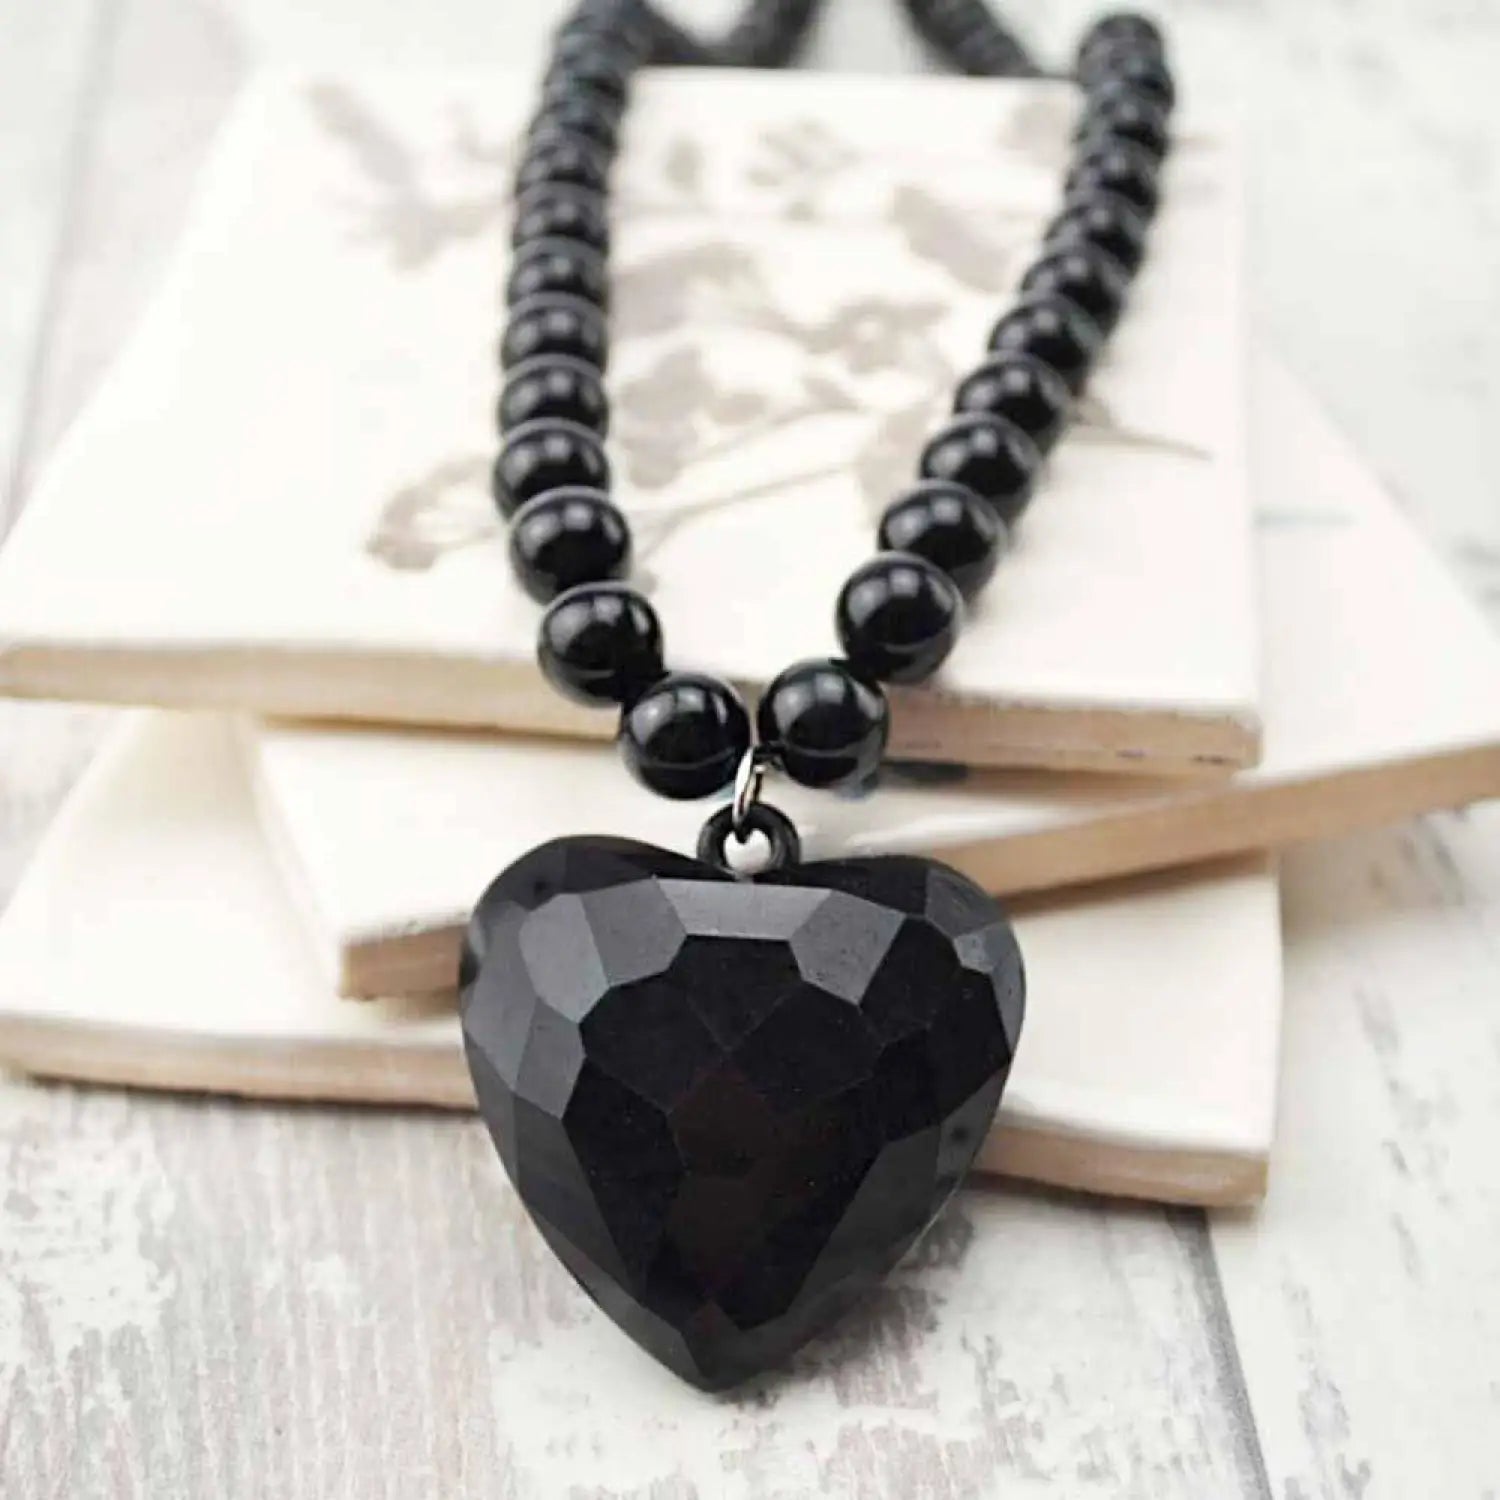 Heart Charm Ball Chain Necklace - Lightweight Black Heart Necklace with Beads